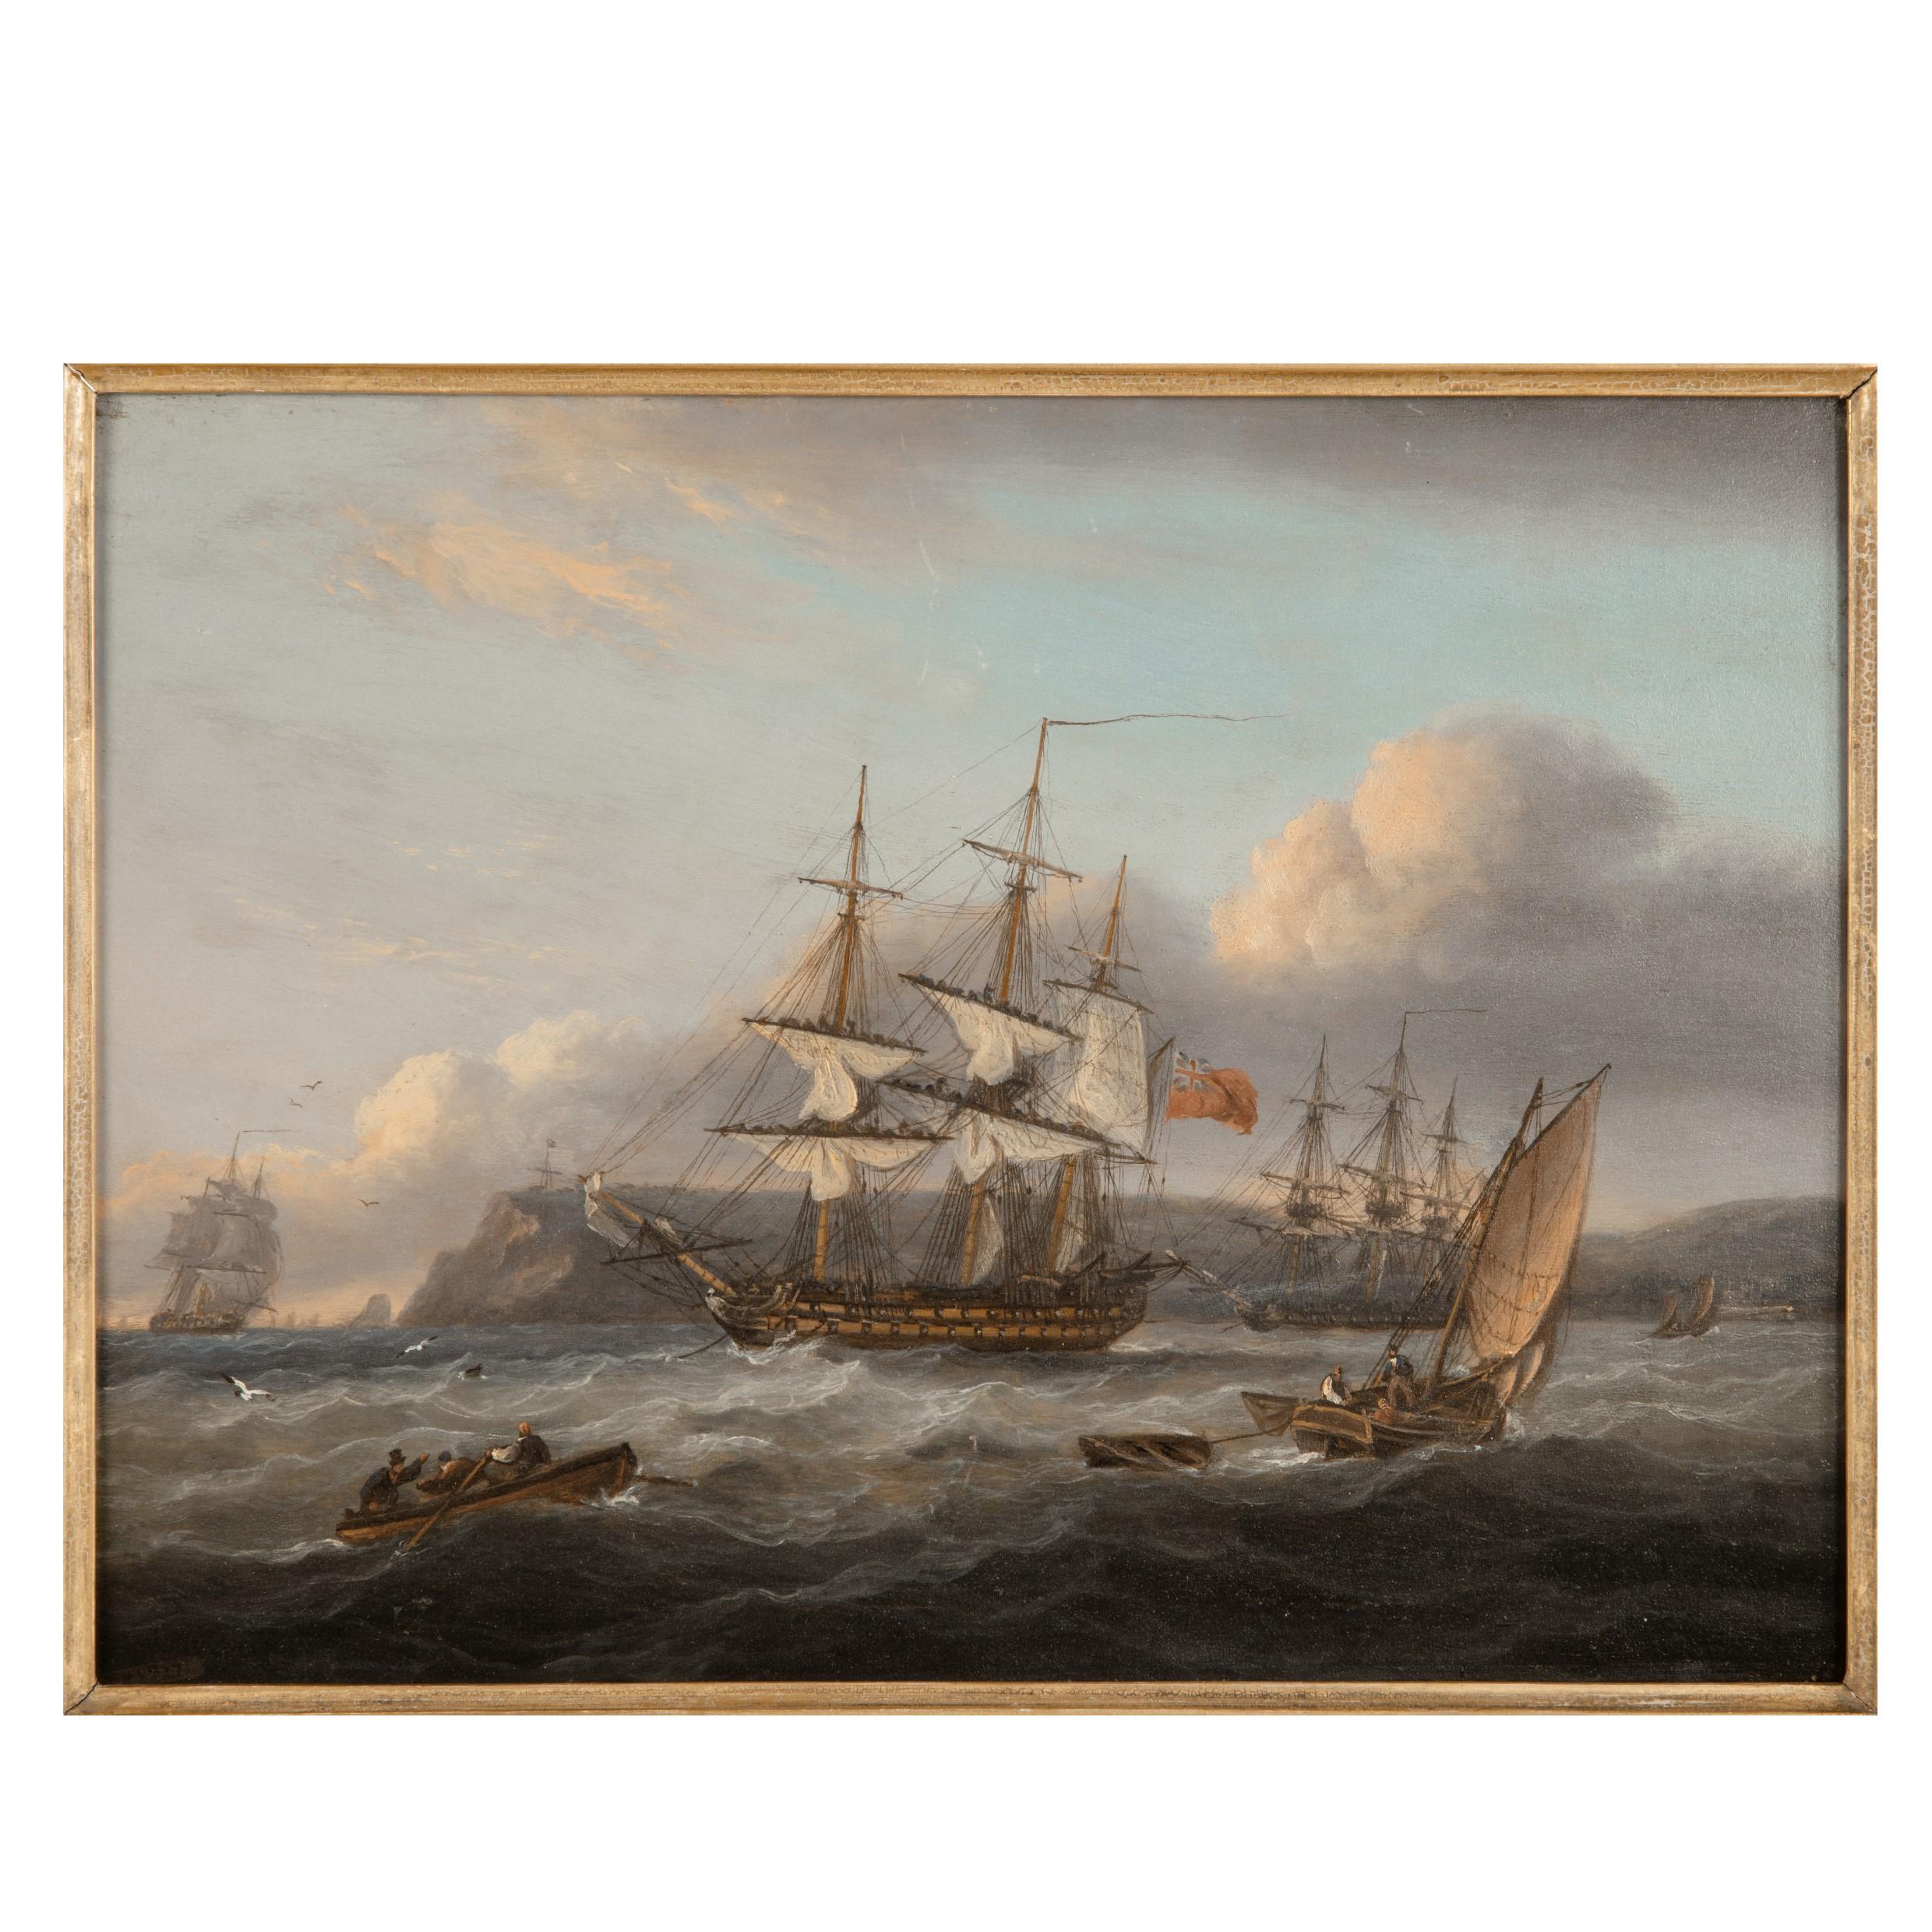 Thomas Luny (British, 1759-1837) HMS Bellerophon leaving Torbay with the defeated Emperor Napoleon aboard, 26th July 1815, this oil on panel shows the crew manning the yards to bring in the sails, having just dropped anchor in Torbay, with another